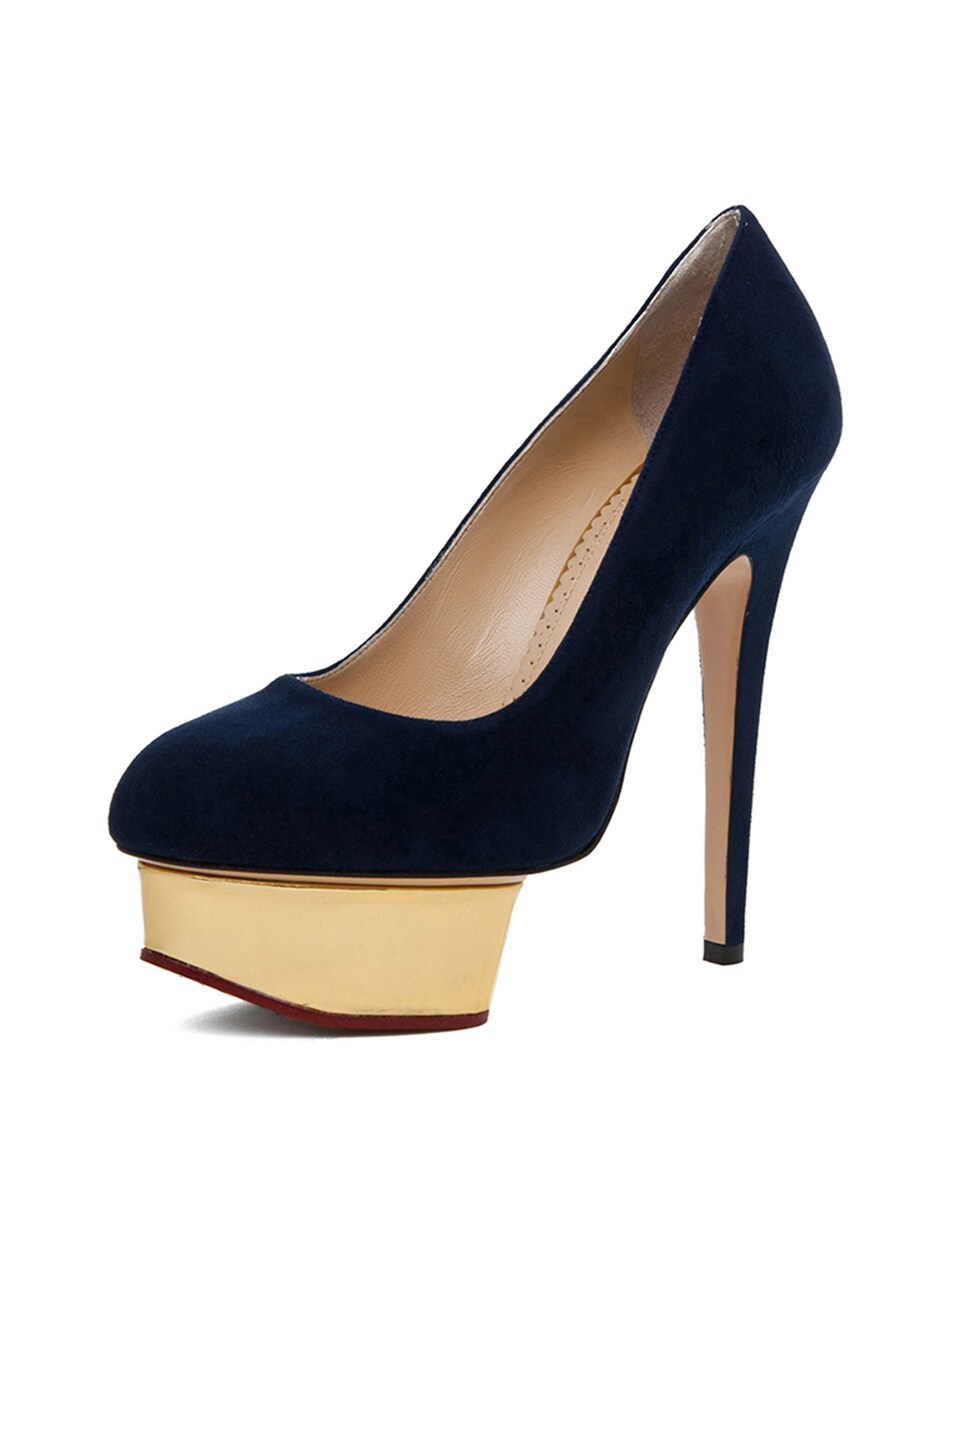 CHARLOTTE OLYMPIA Dolly Signature Court Island Suede Pumps in Navy